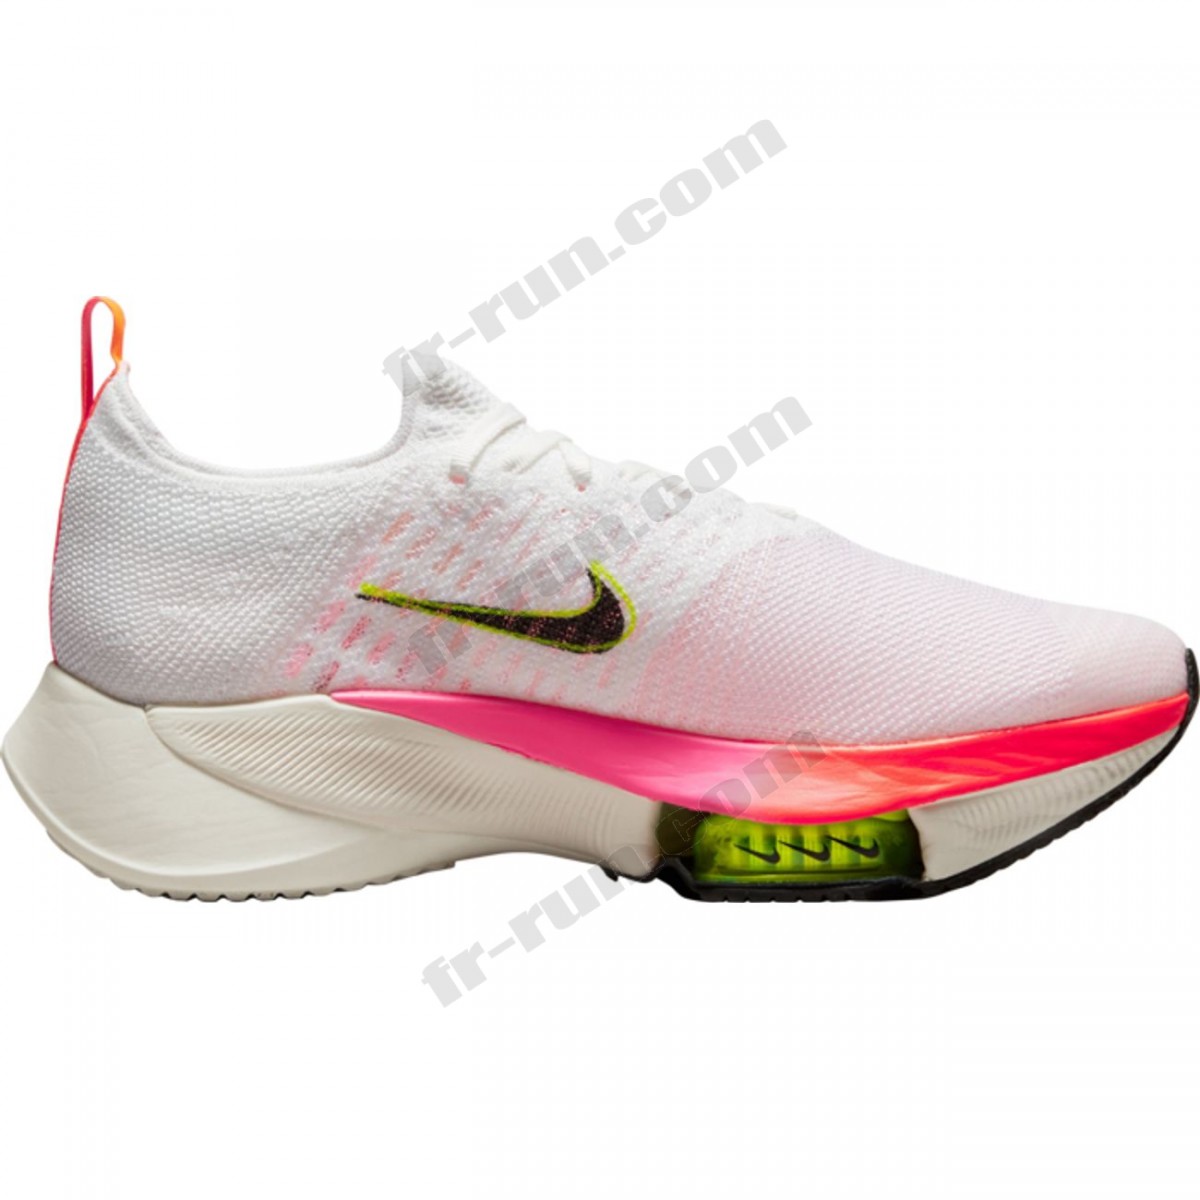 Nike/CHAUSSURES BASSES running femme NIKE AIR ZOOM TEMPO NEXT% FK T ◇◇◇ Pas Cher Du Tout - -1